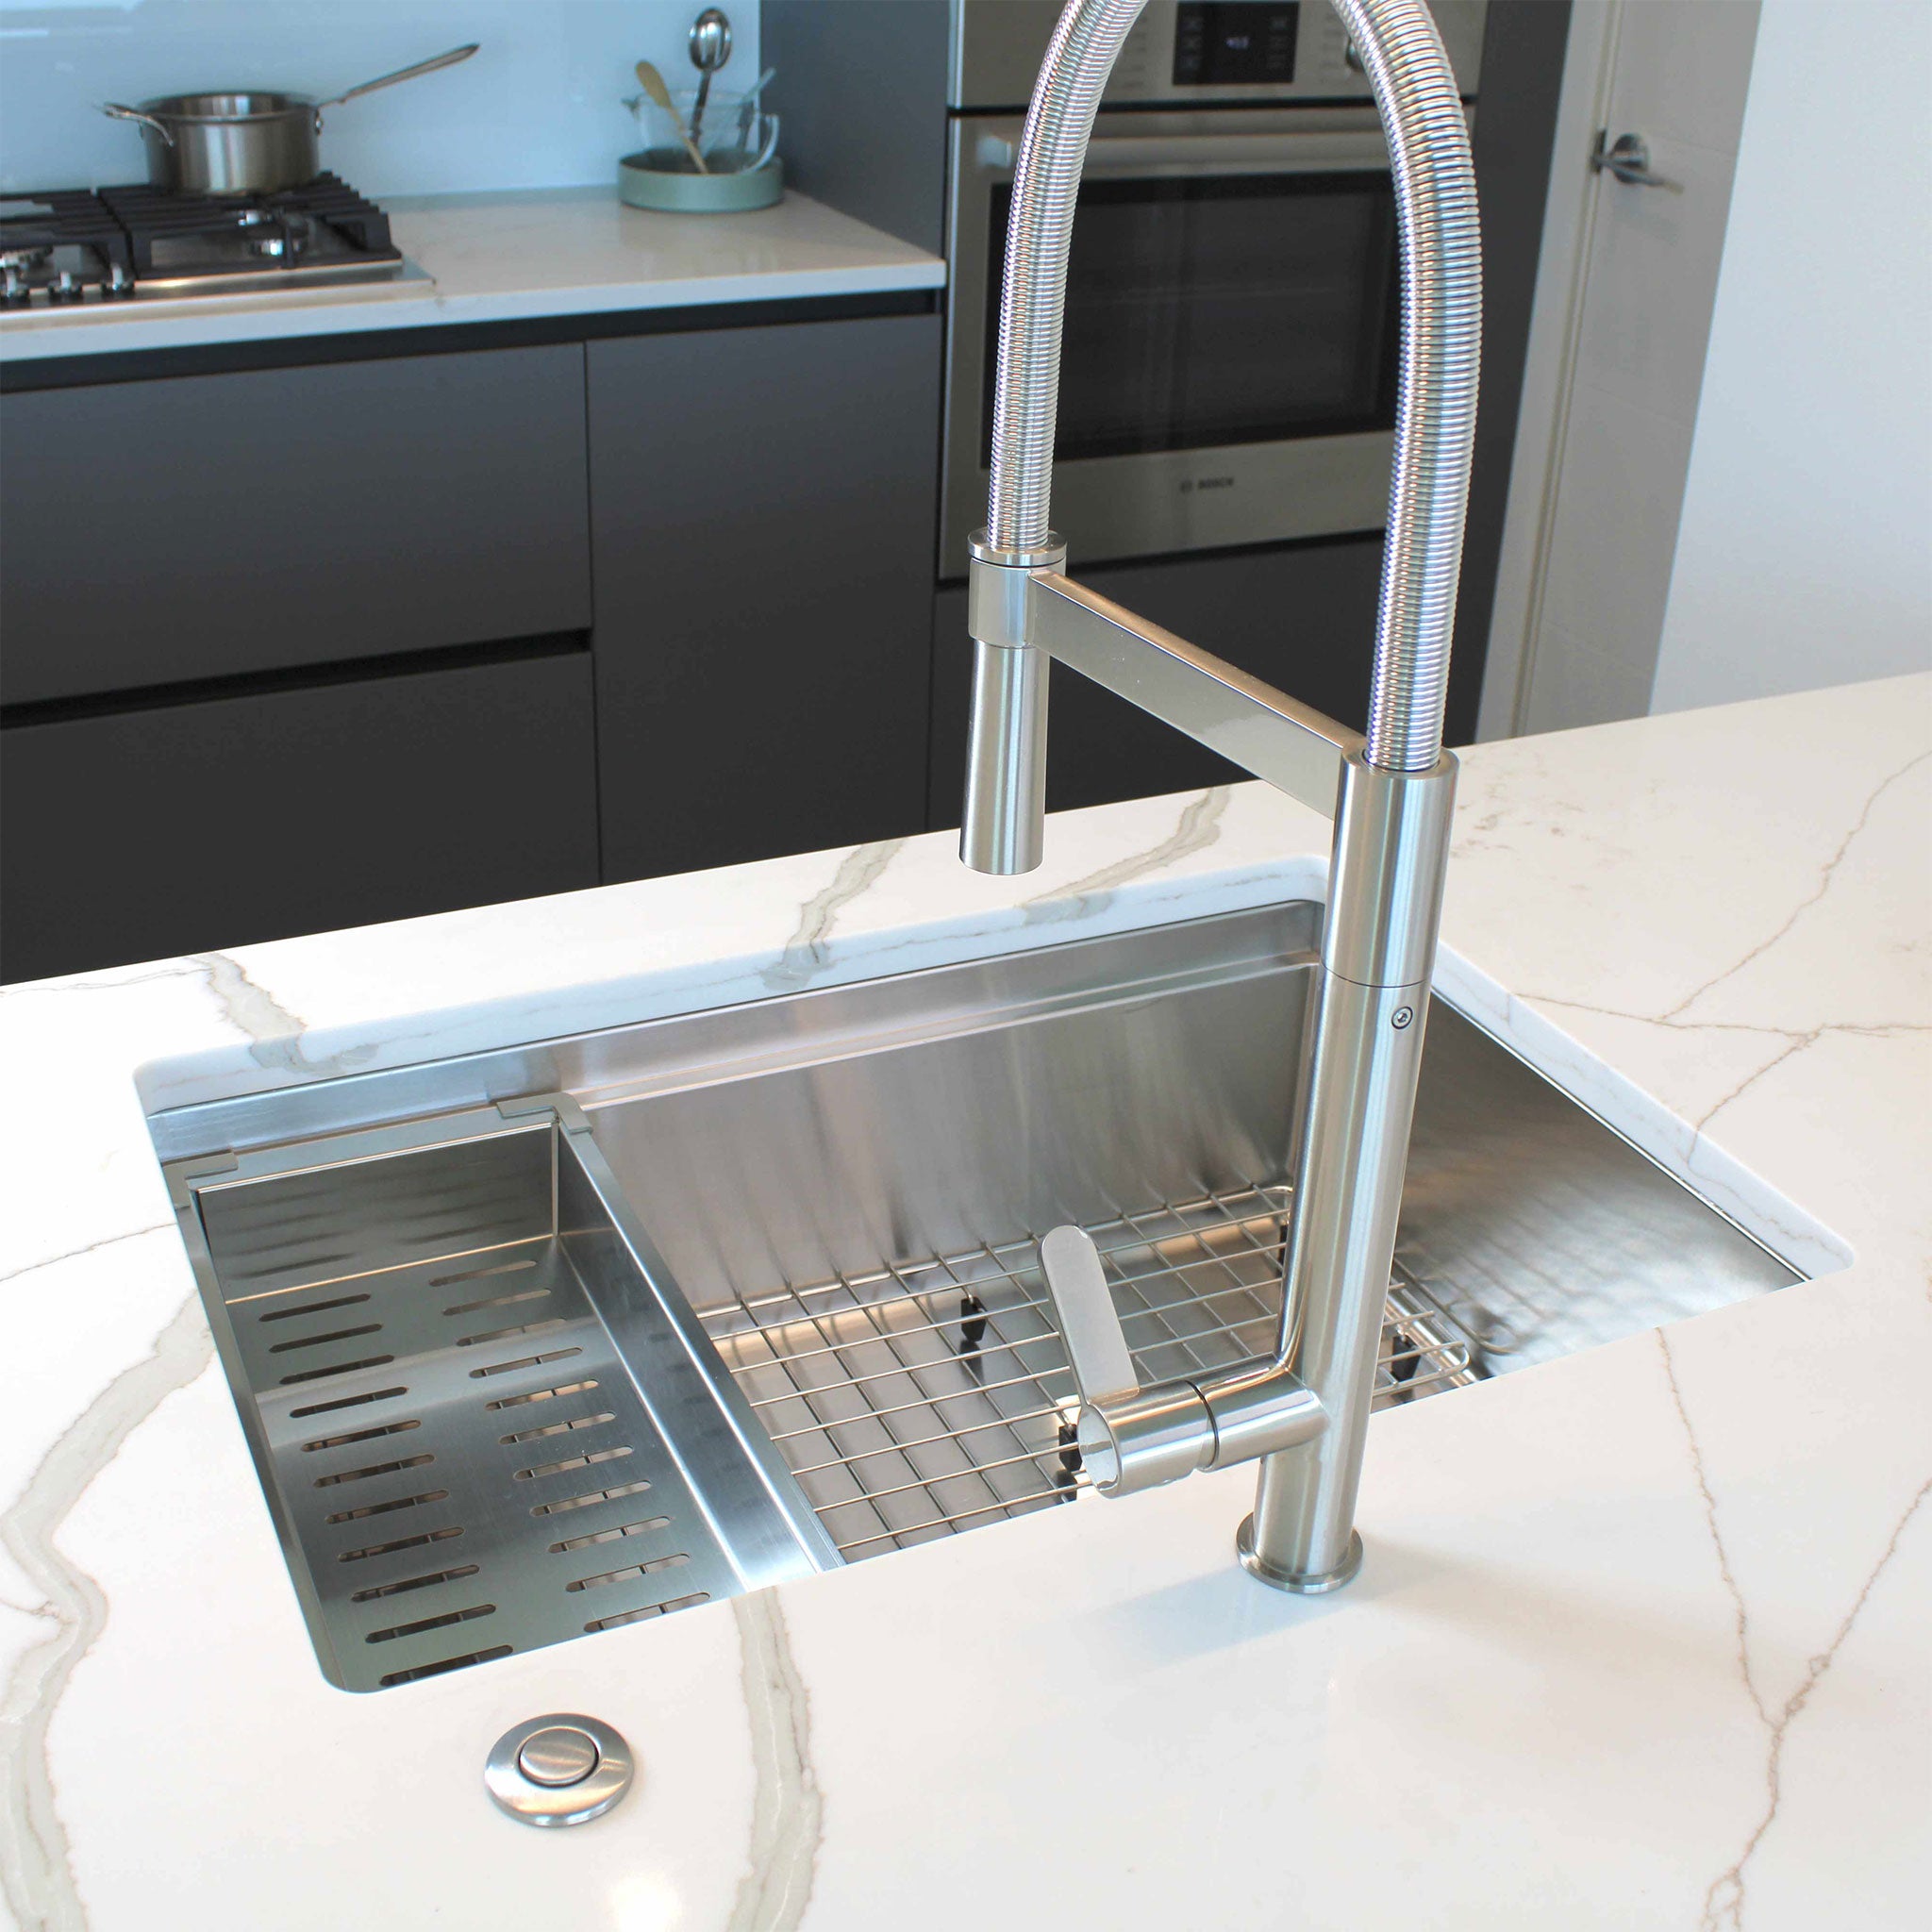 Client submission of Create Goods’ 28” workstation sink and a colander and grid for the basin.